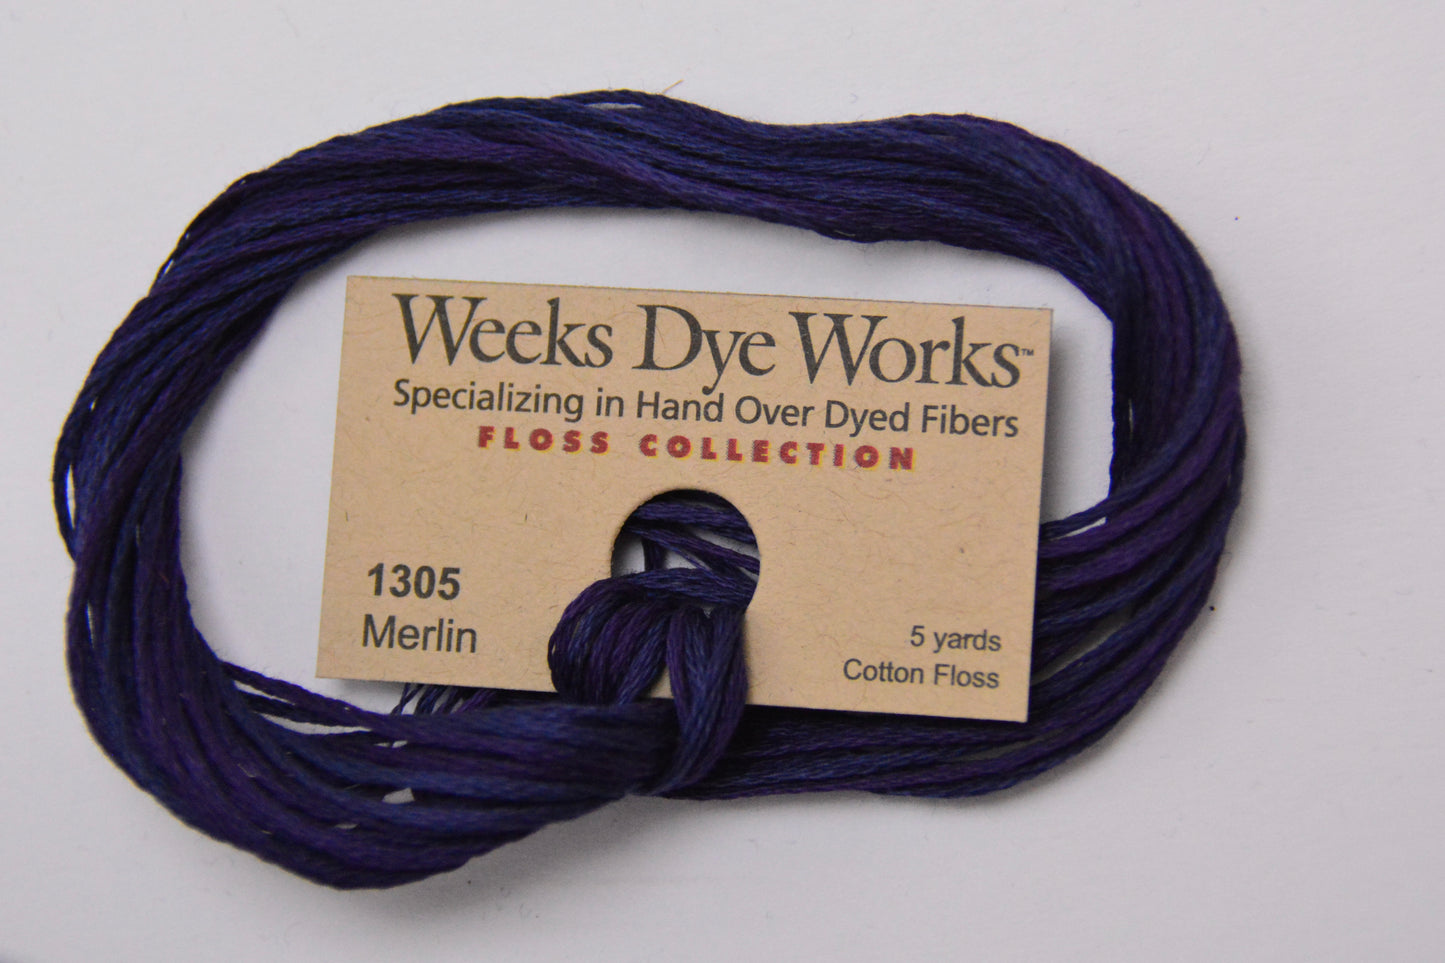 Merlin 1305 Weeks Dye Works 6-Strand Hand-Dyed Embroidery Floss